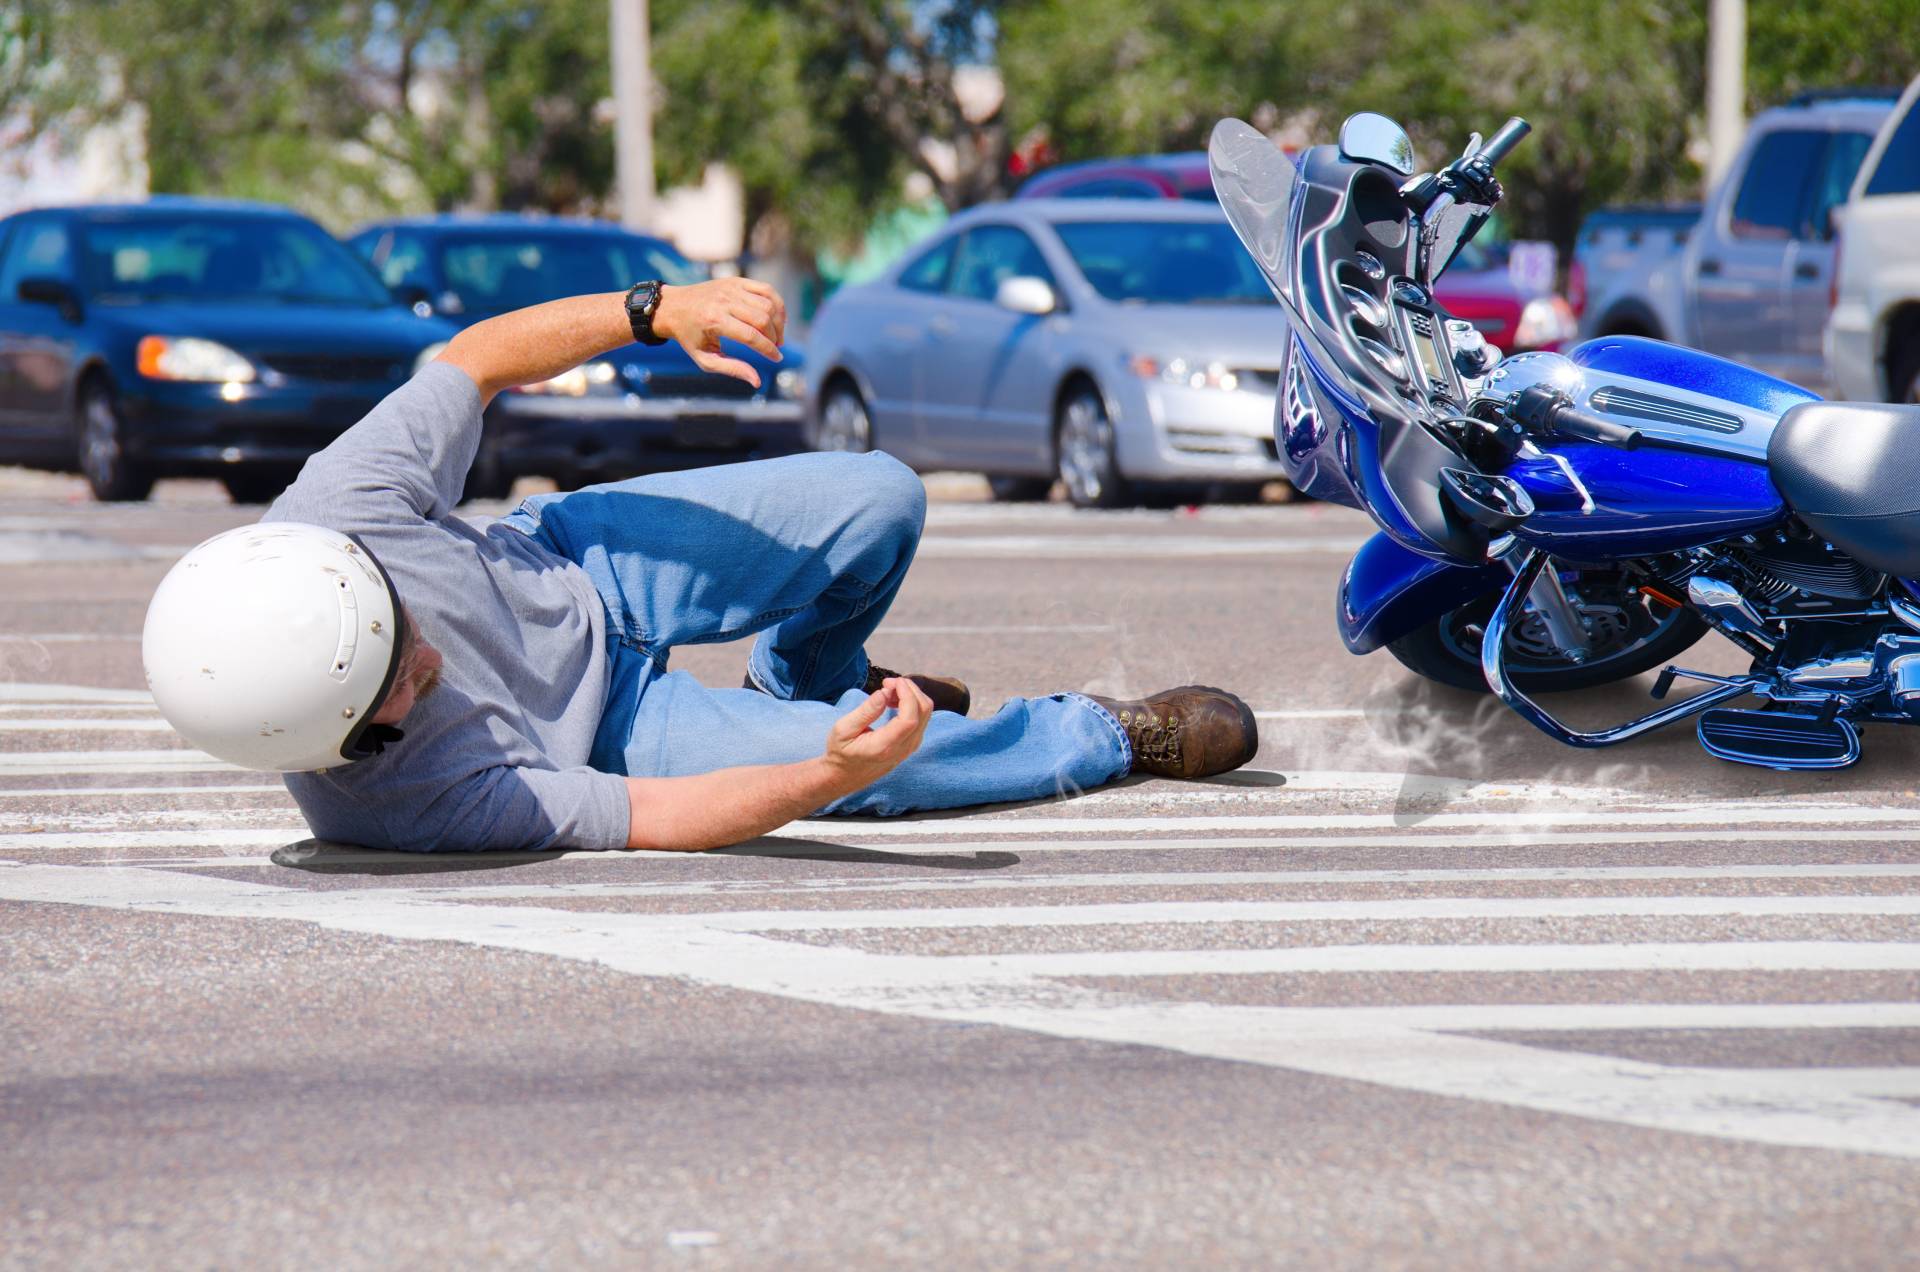 You deserve compensation for your motorcycle accident in Lawrenceville, Georgia. Schedule a free consultation with The Angell Law Firm today.